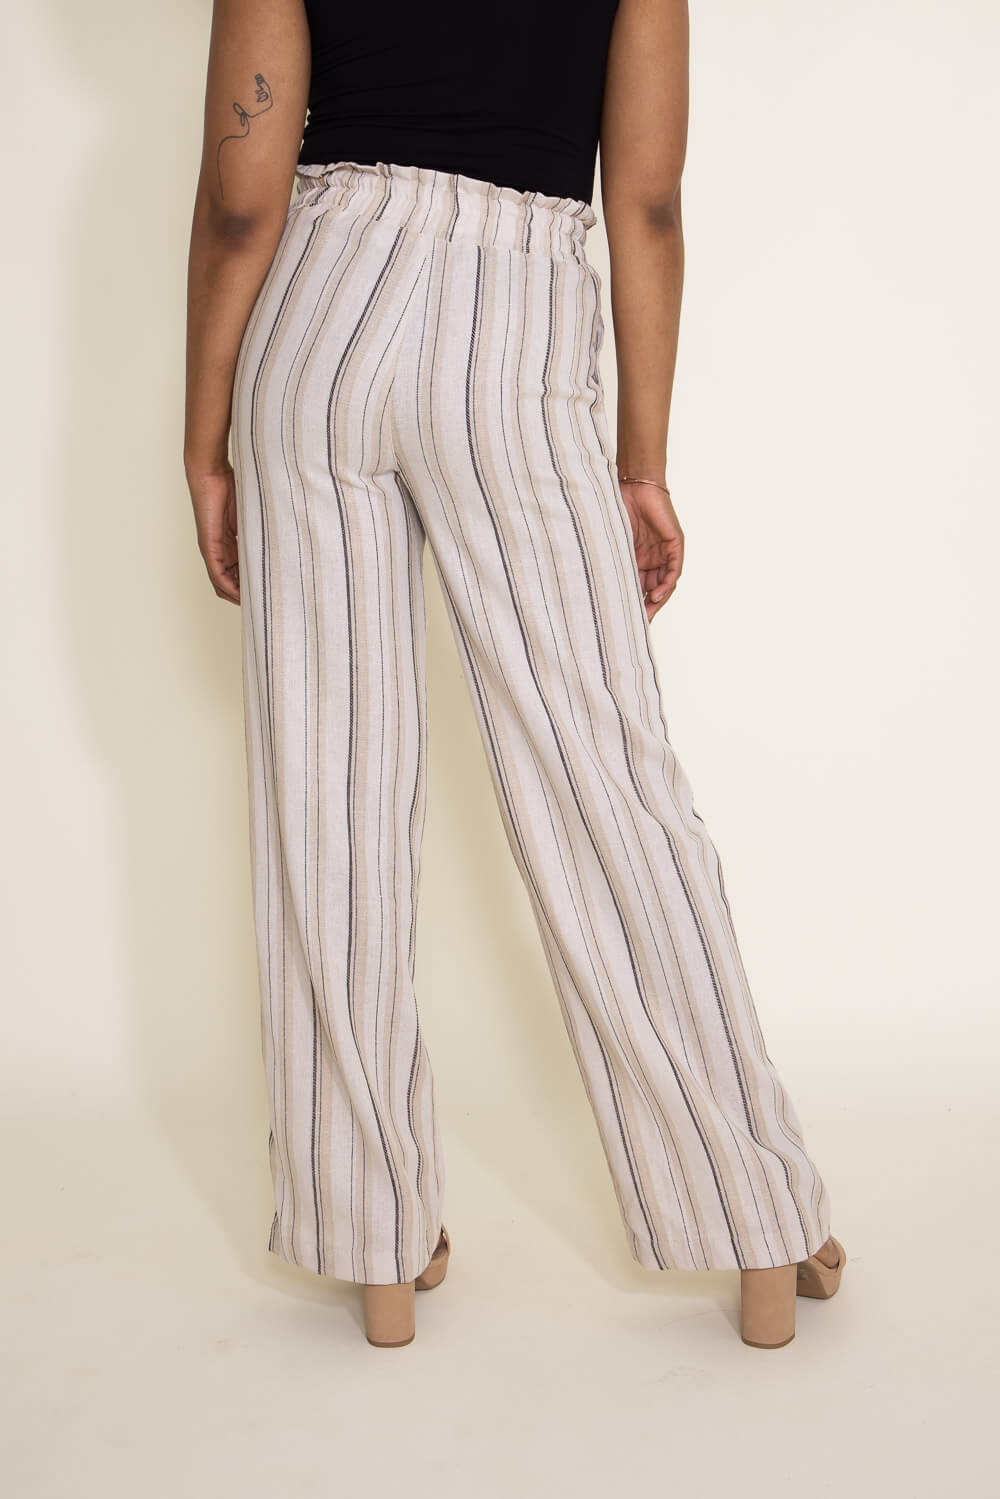 Plus Striped And Floral Print Flare Leg Pants